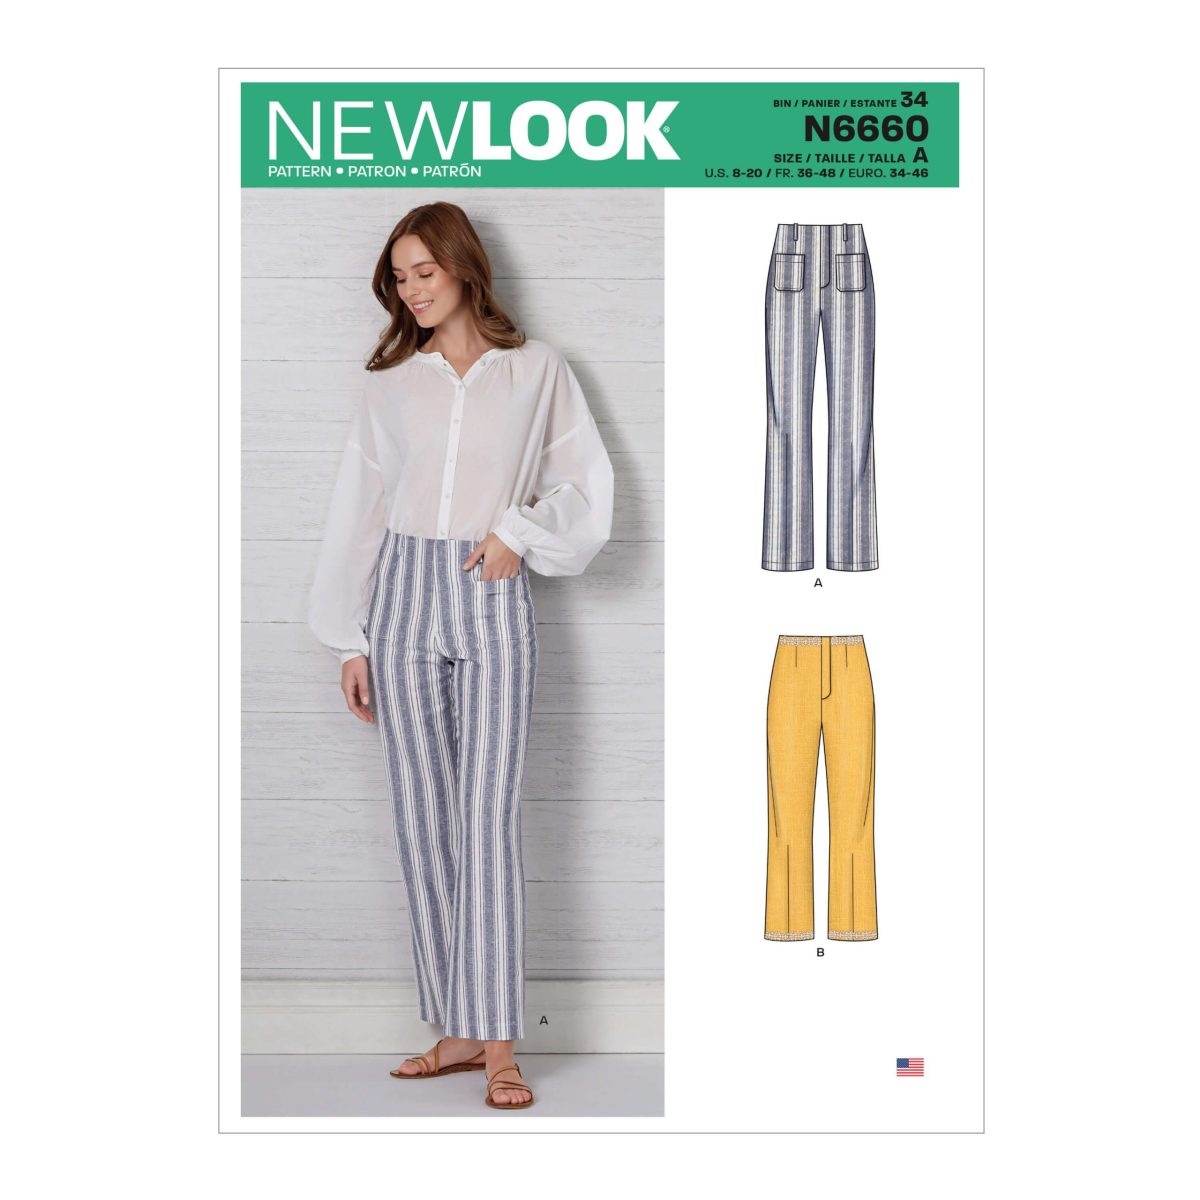 New Look Sewing Pattern N6660 Misses' High Waisted Flared Trouserss